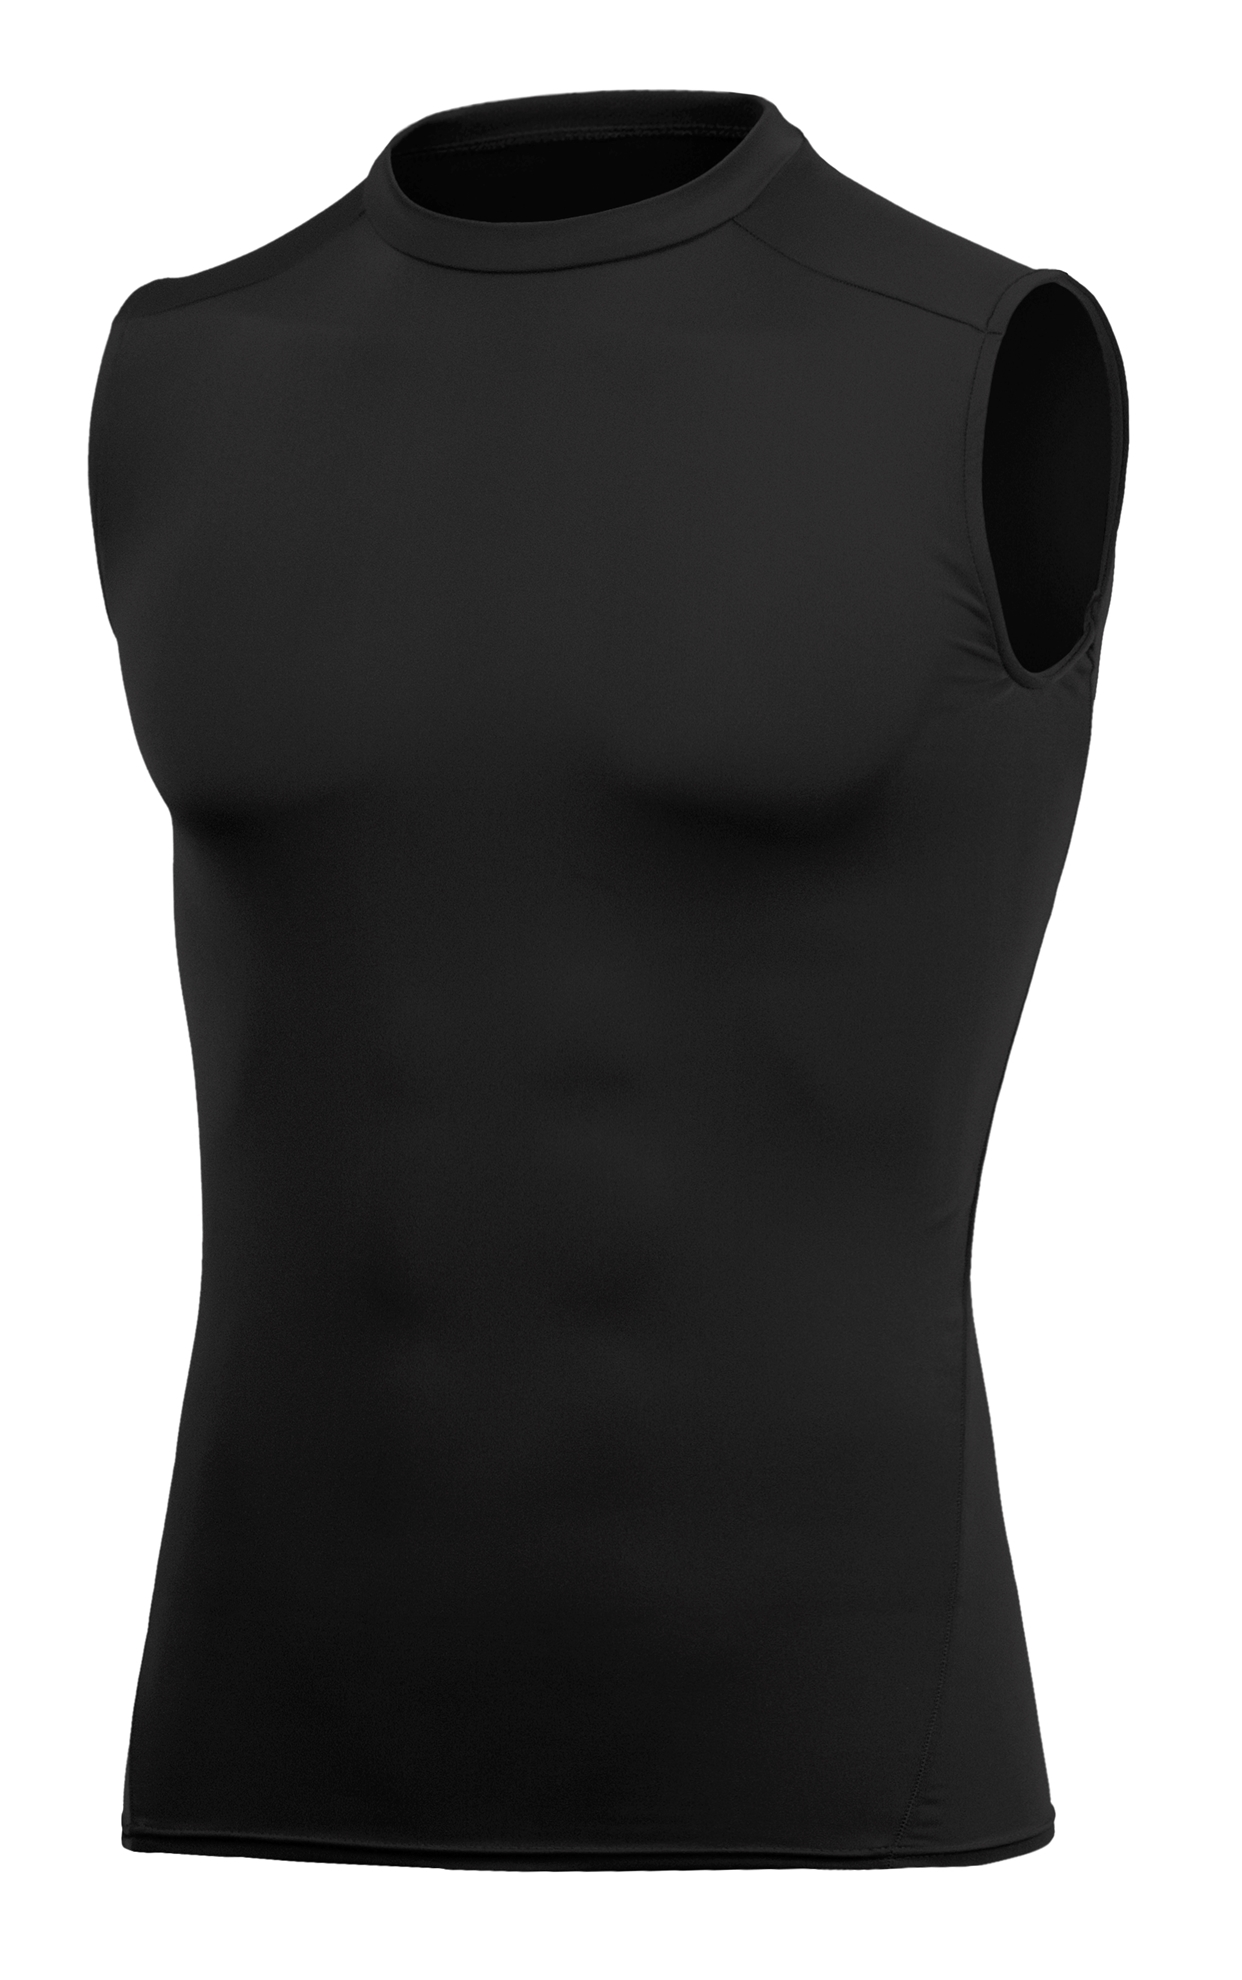 BAW Athletic Wear CT103 - Men's Compression Sleeveless